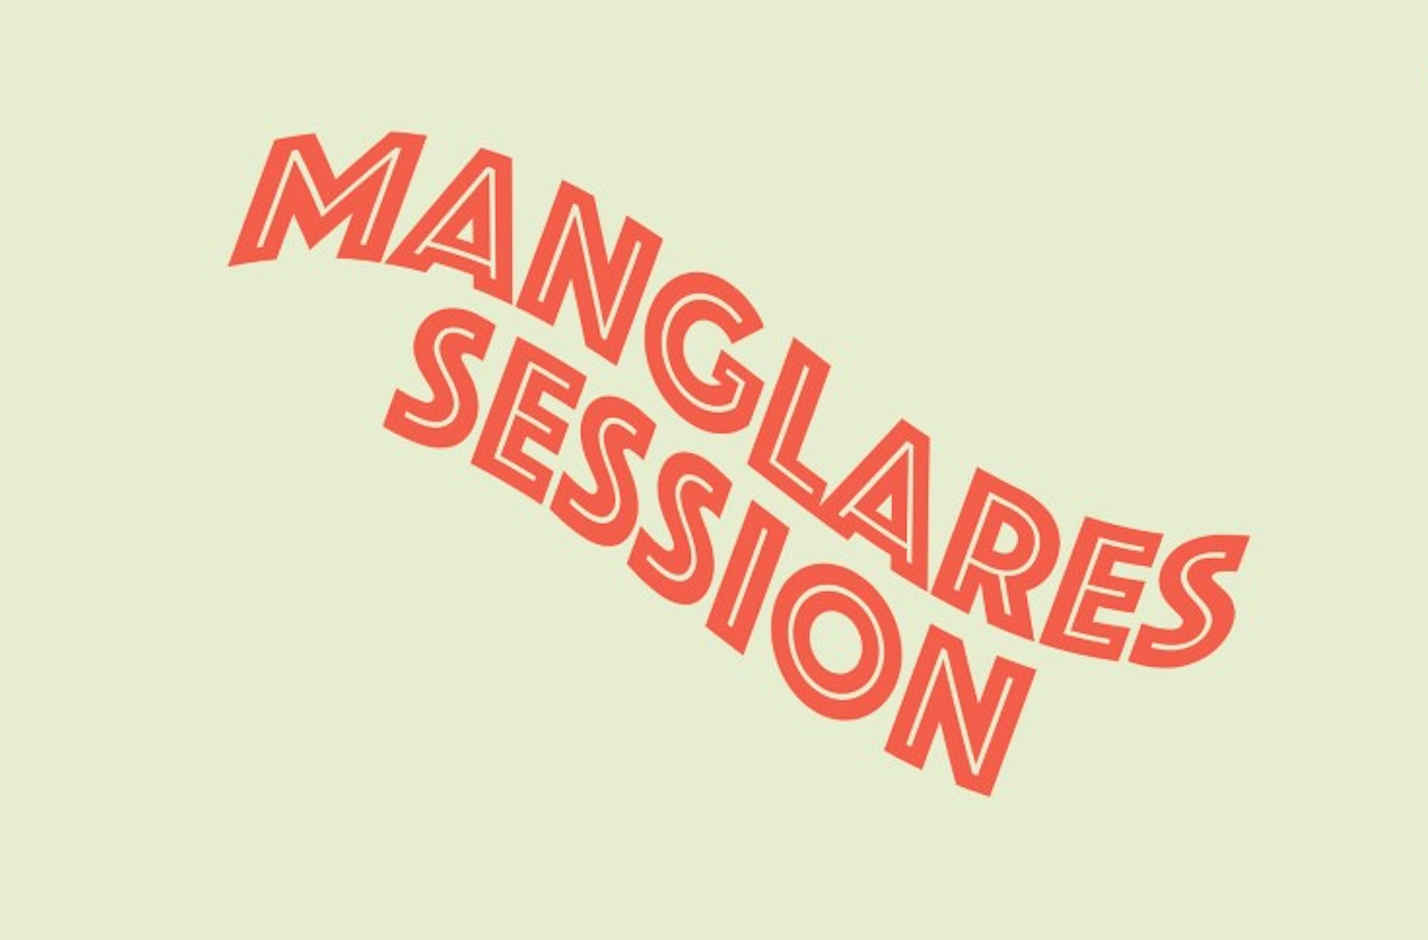 Manglares Session at the Villa Vassilieff - AWARE